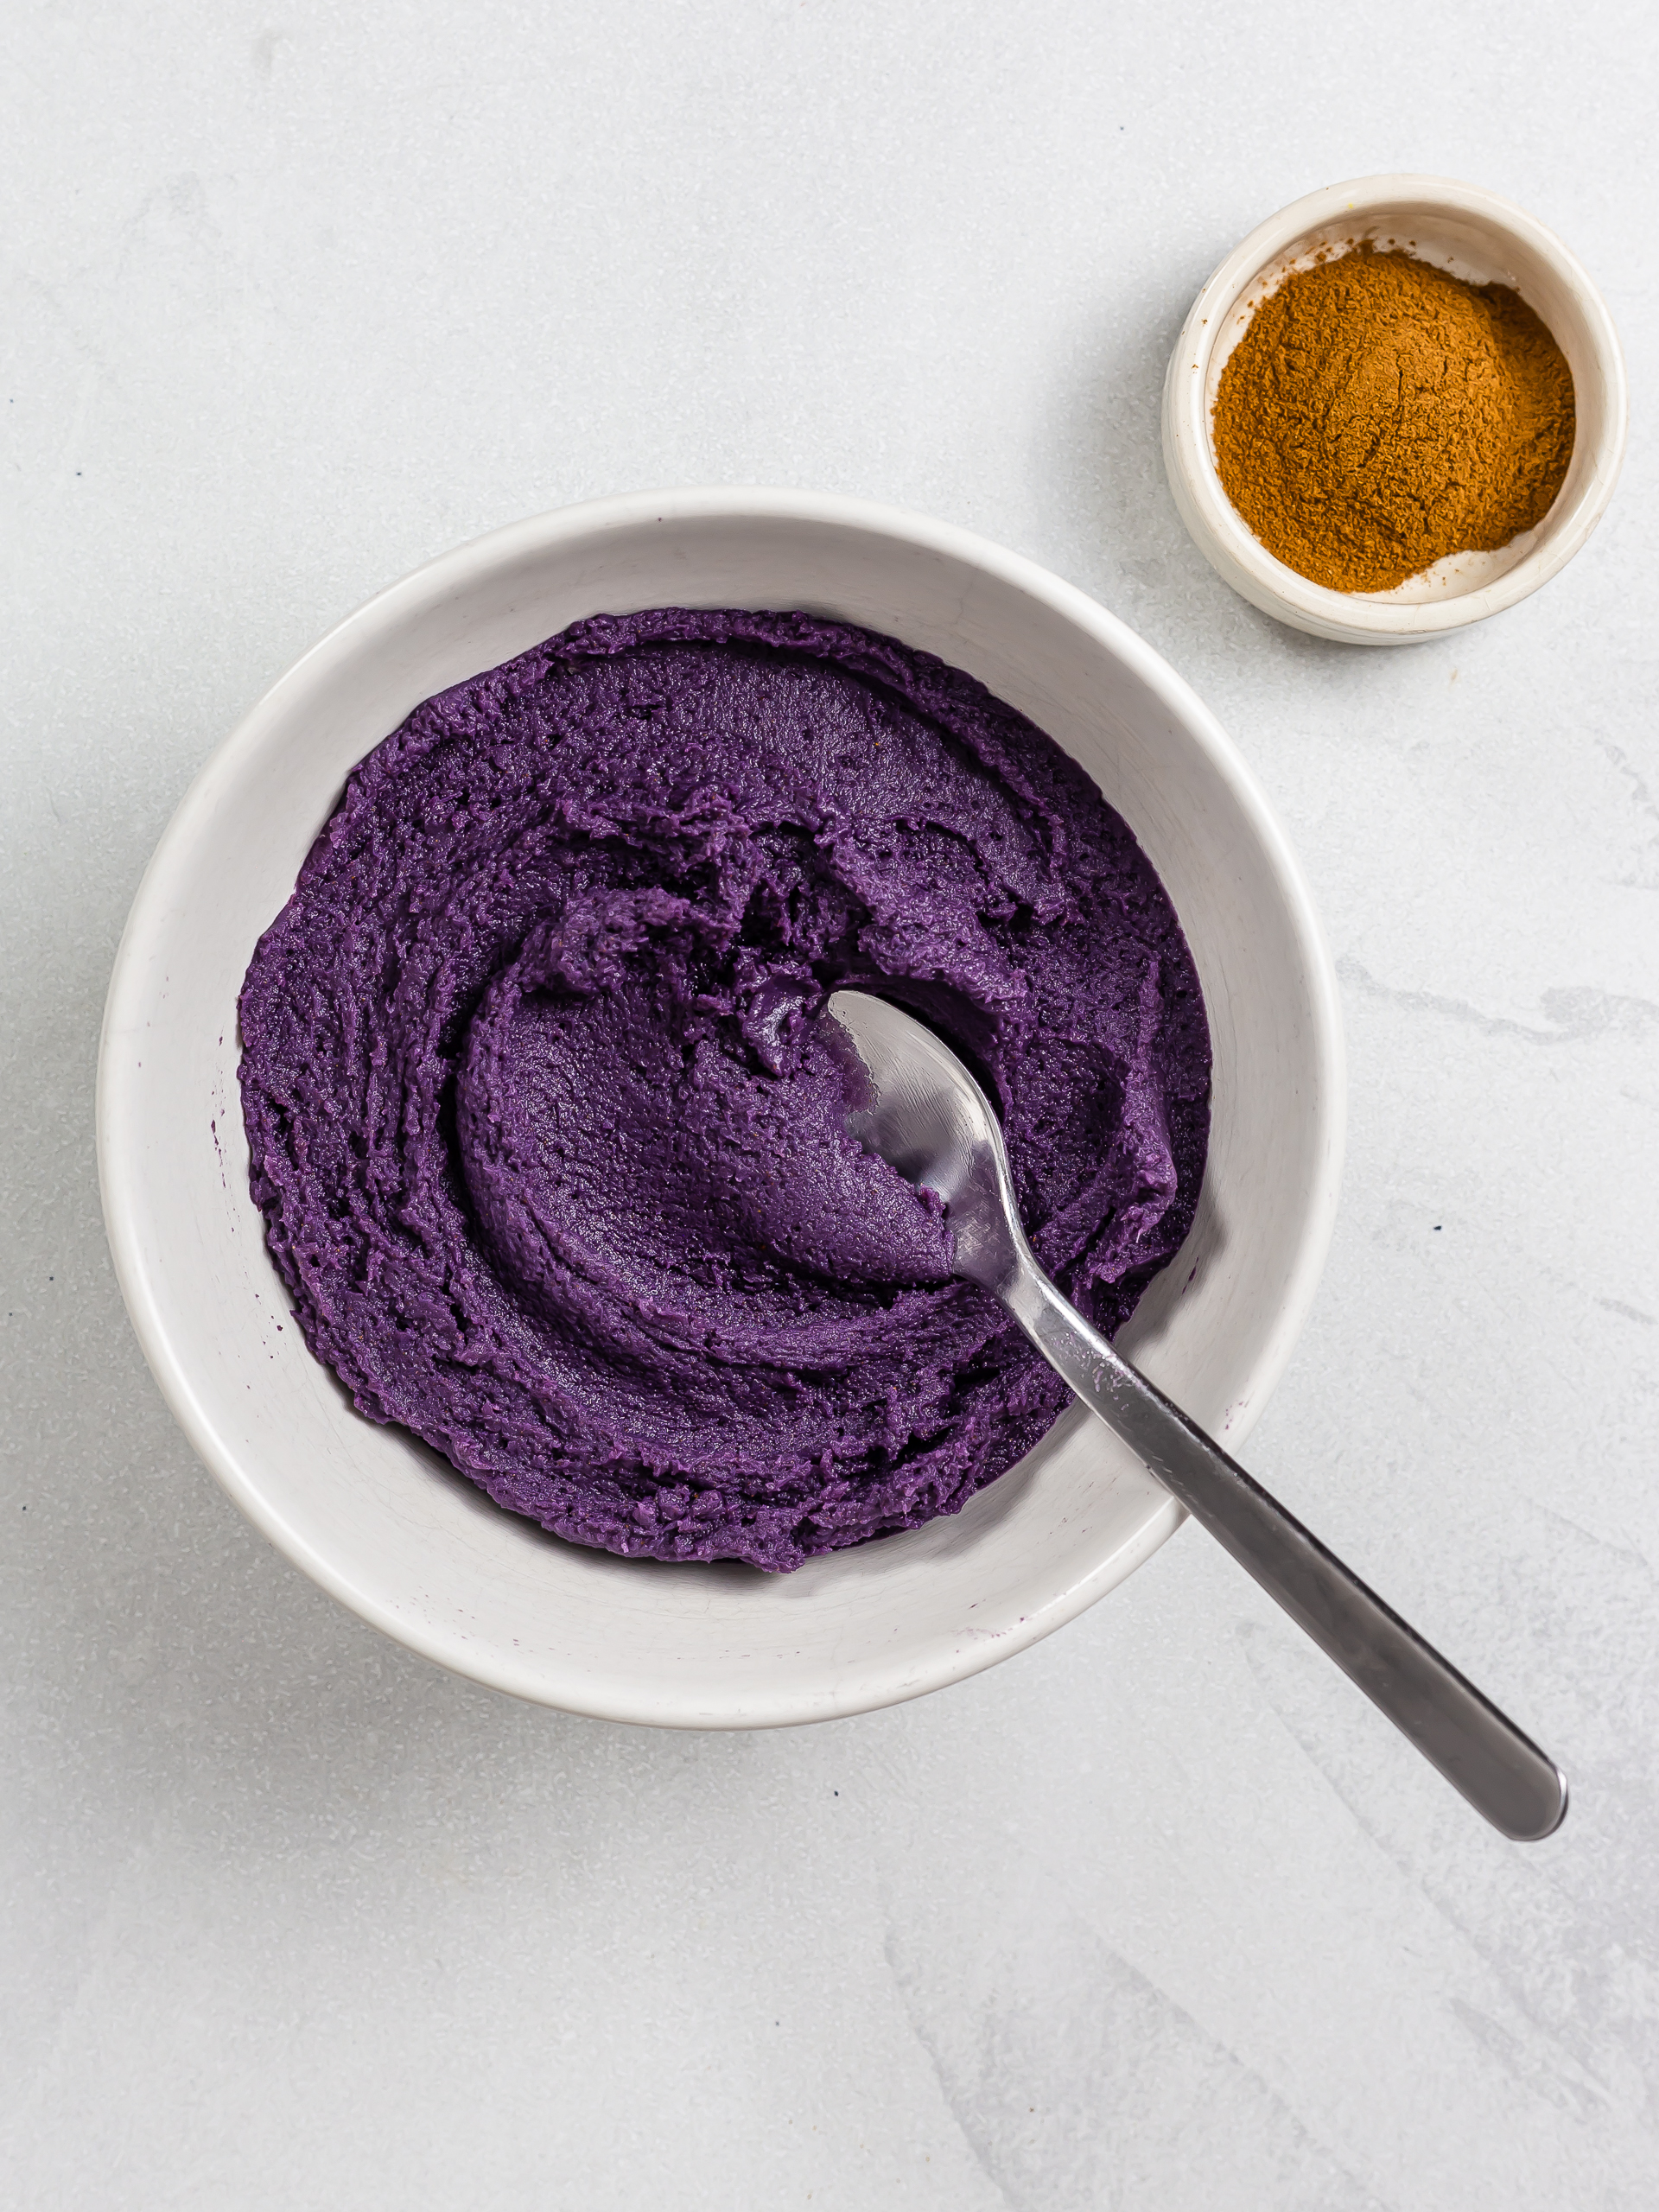 homemade ube butter spread with cinnamon